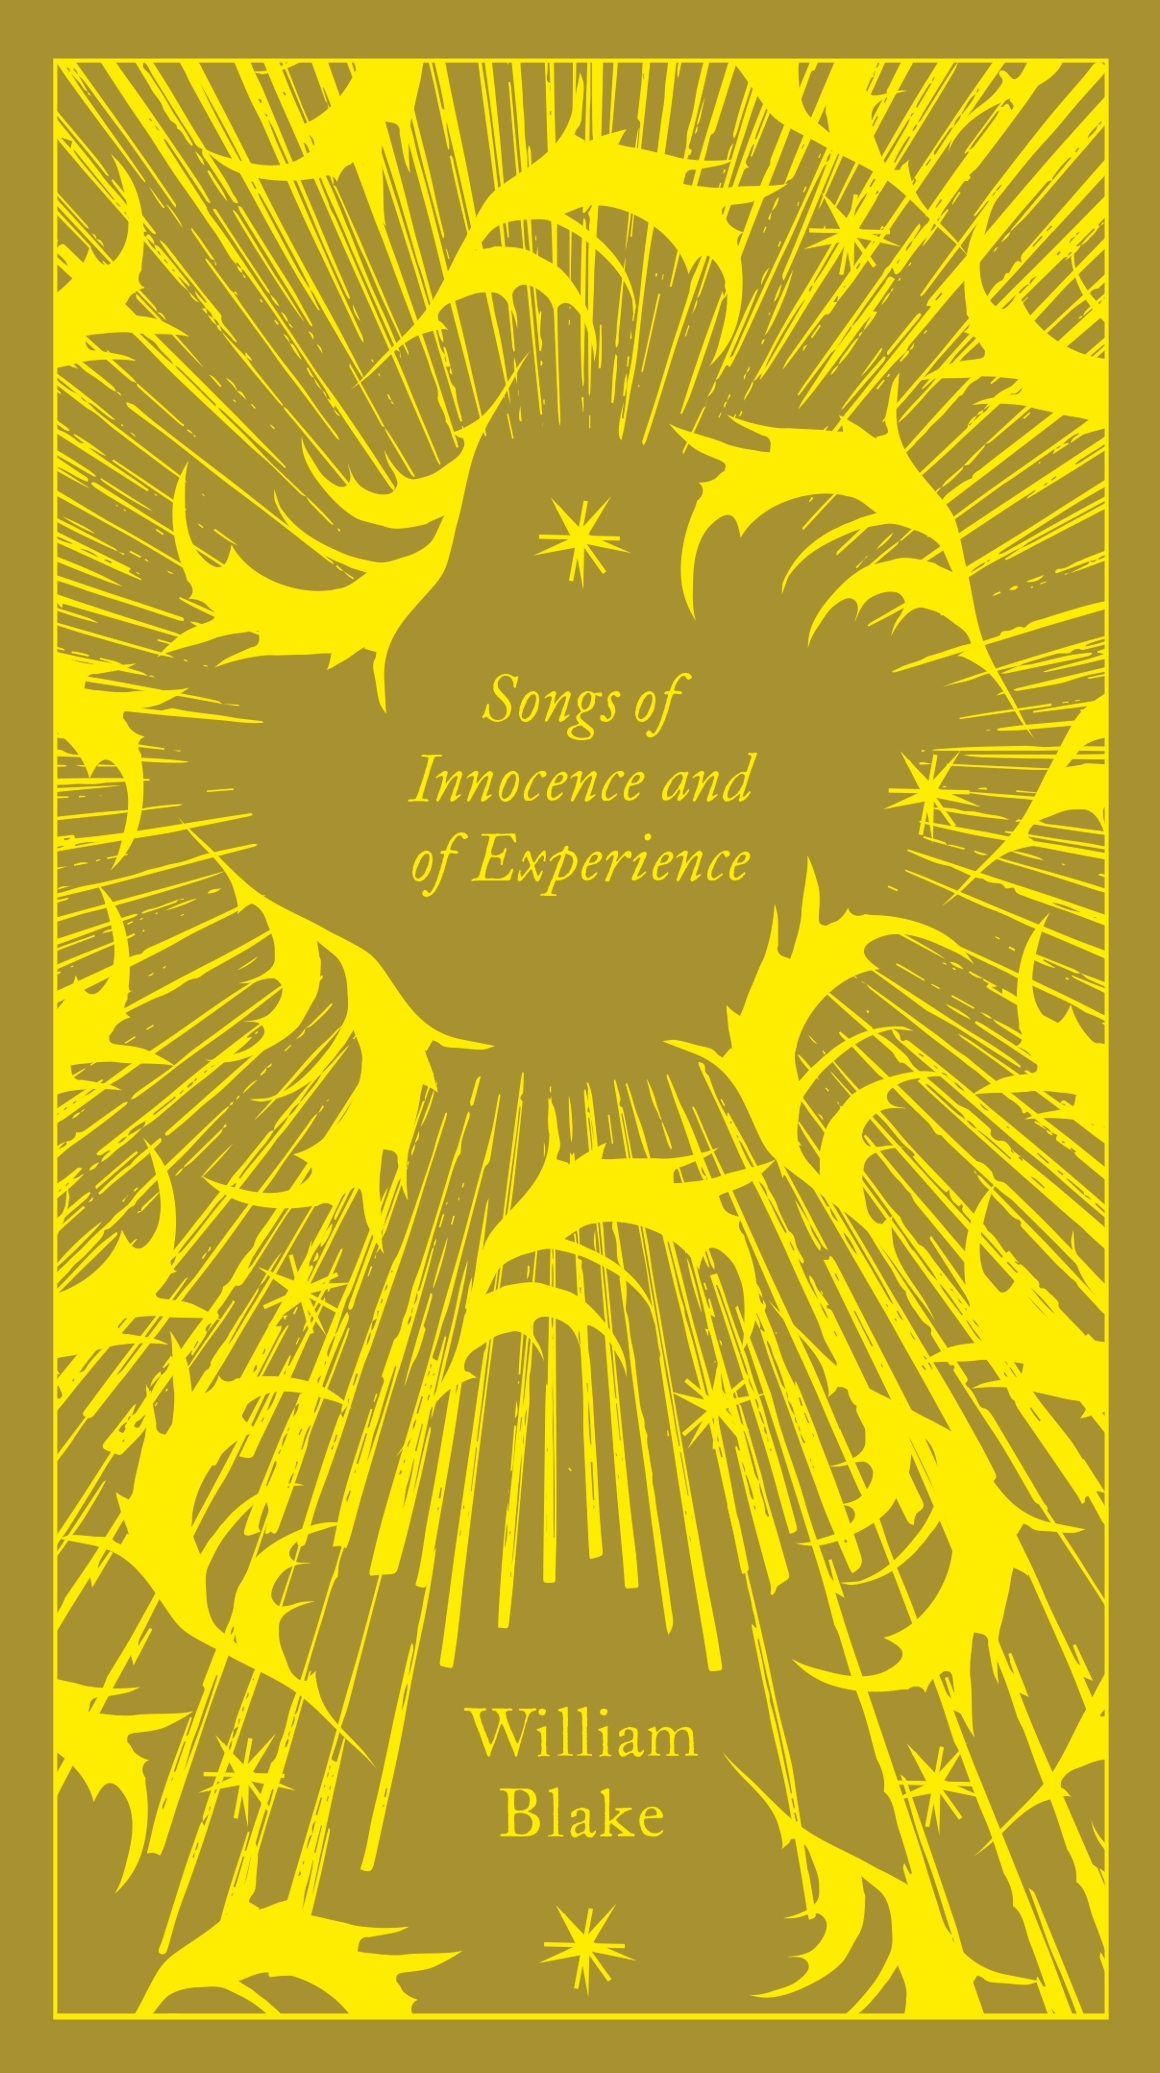 essay on songs of innocence and experience